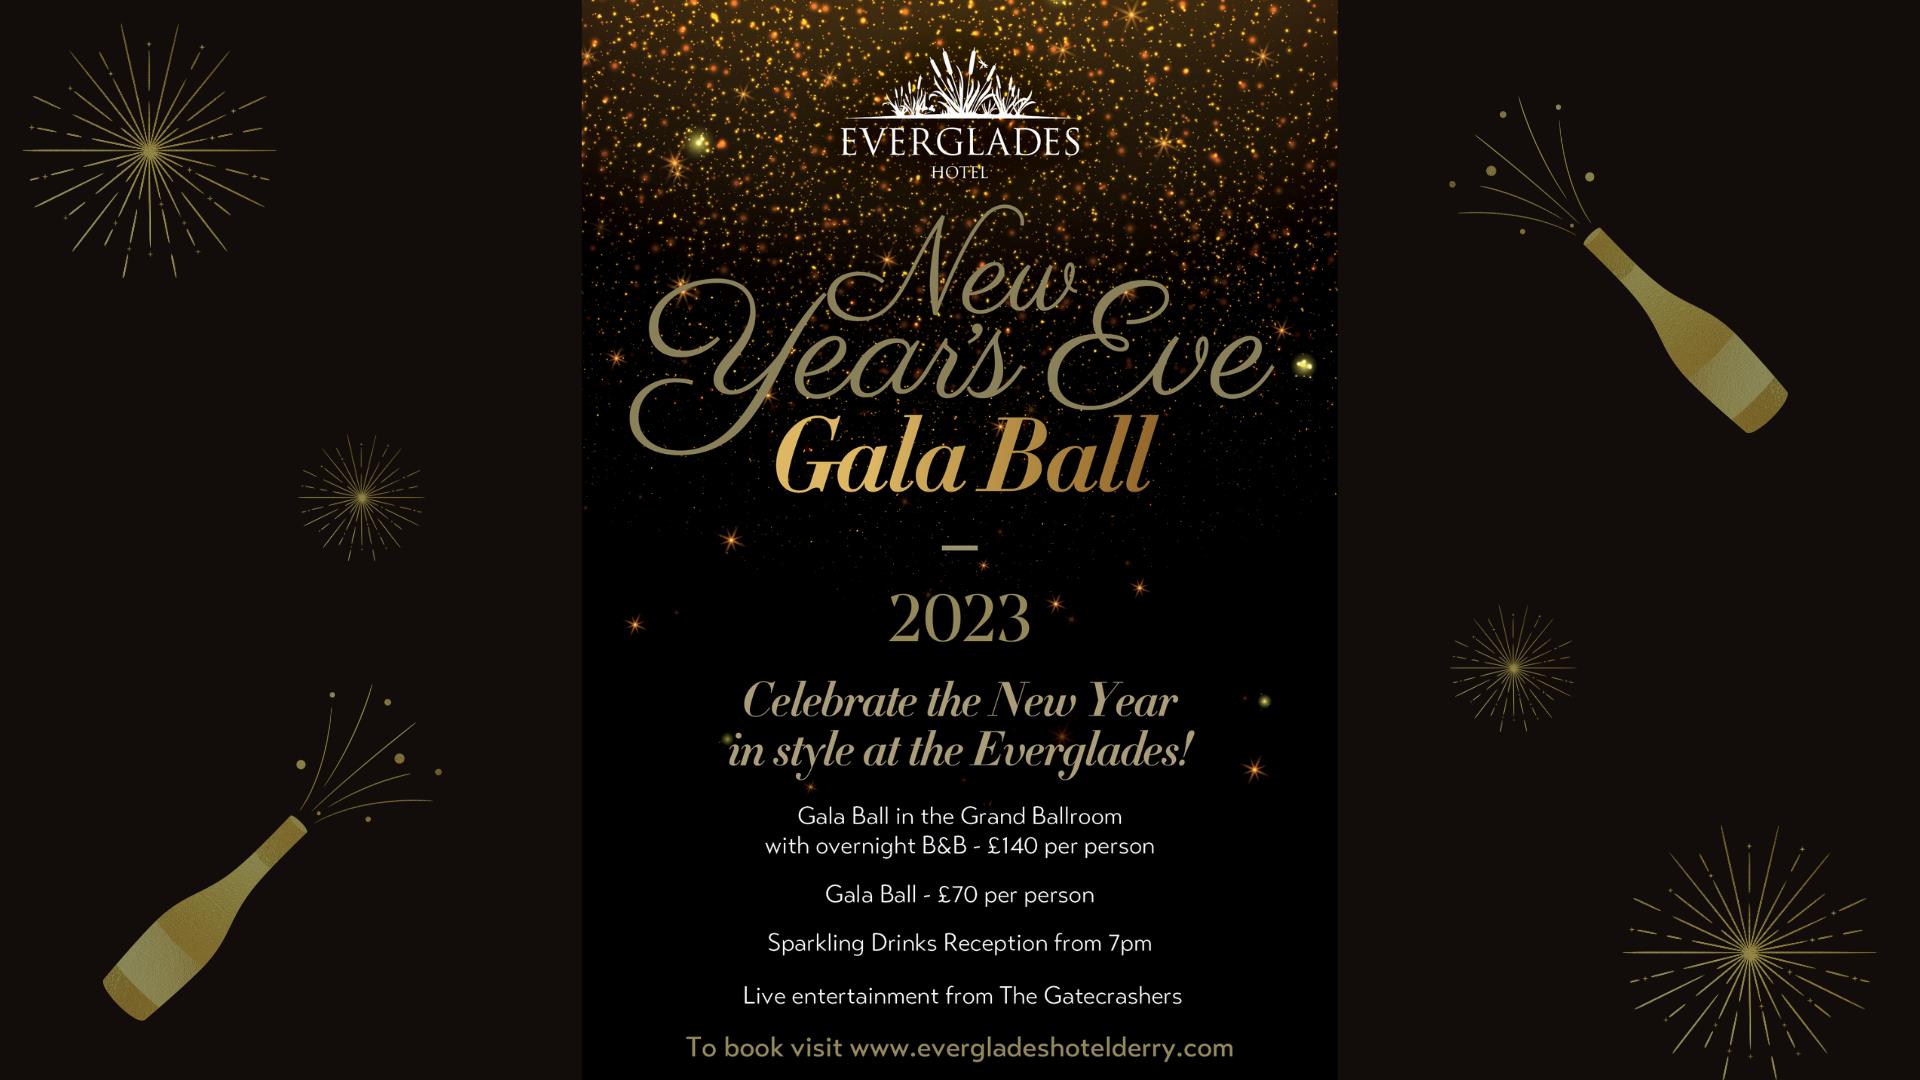 Everglades New Year's Eve Gala Ball Promotional Poster